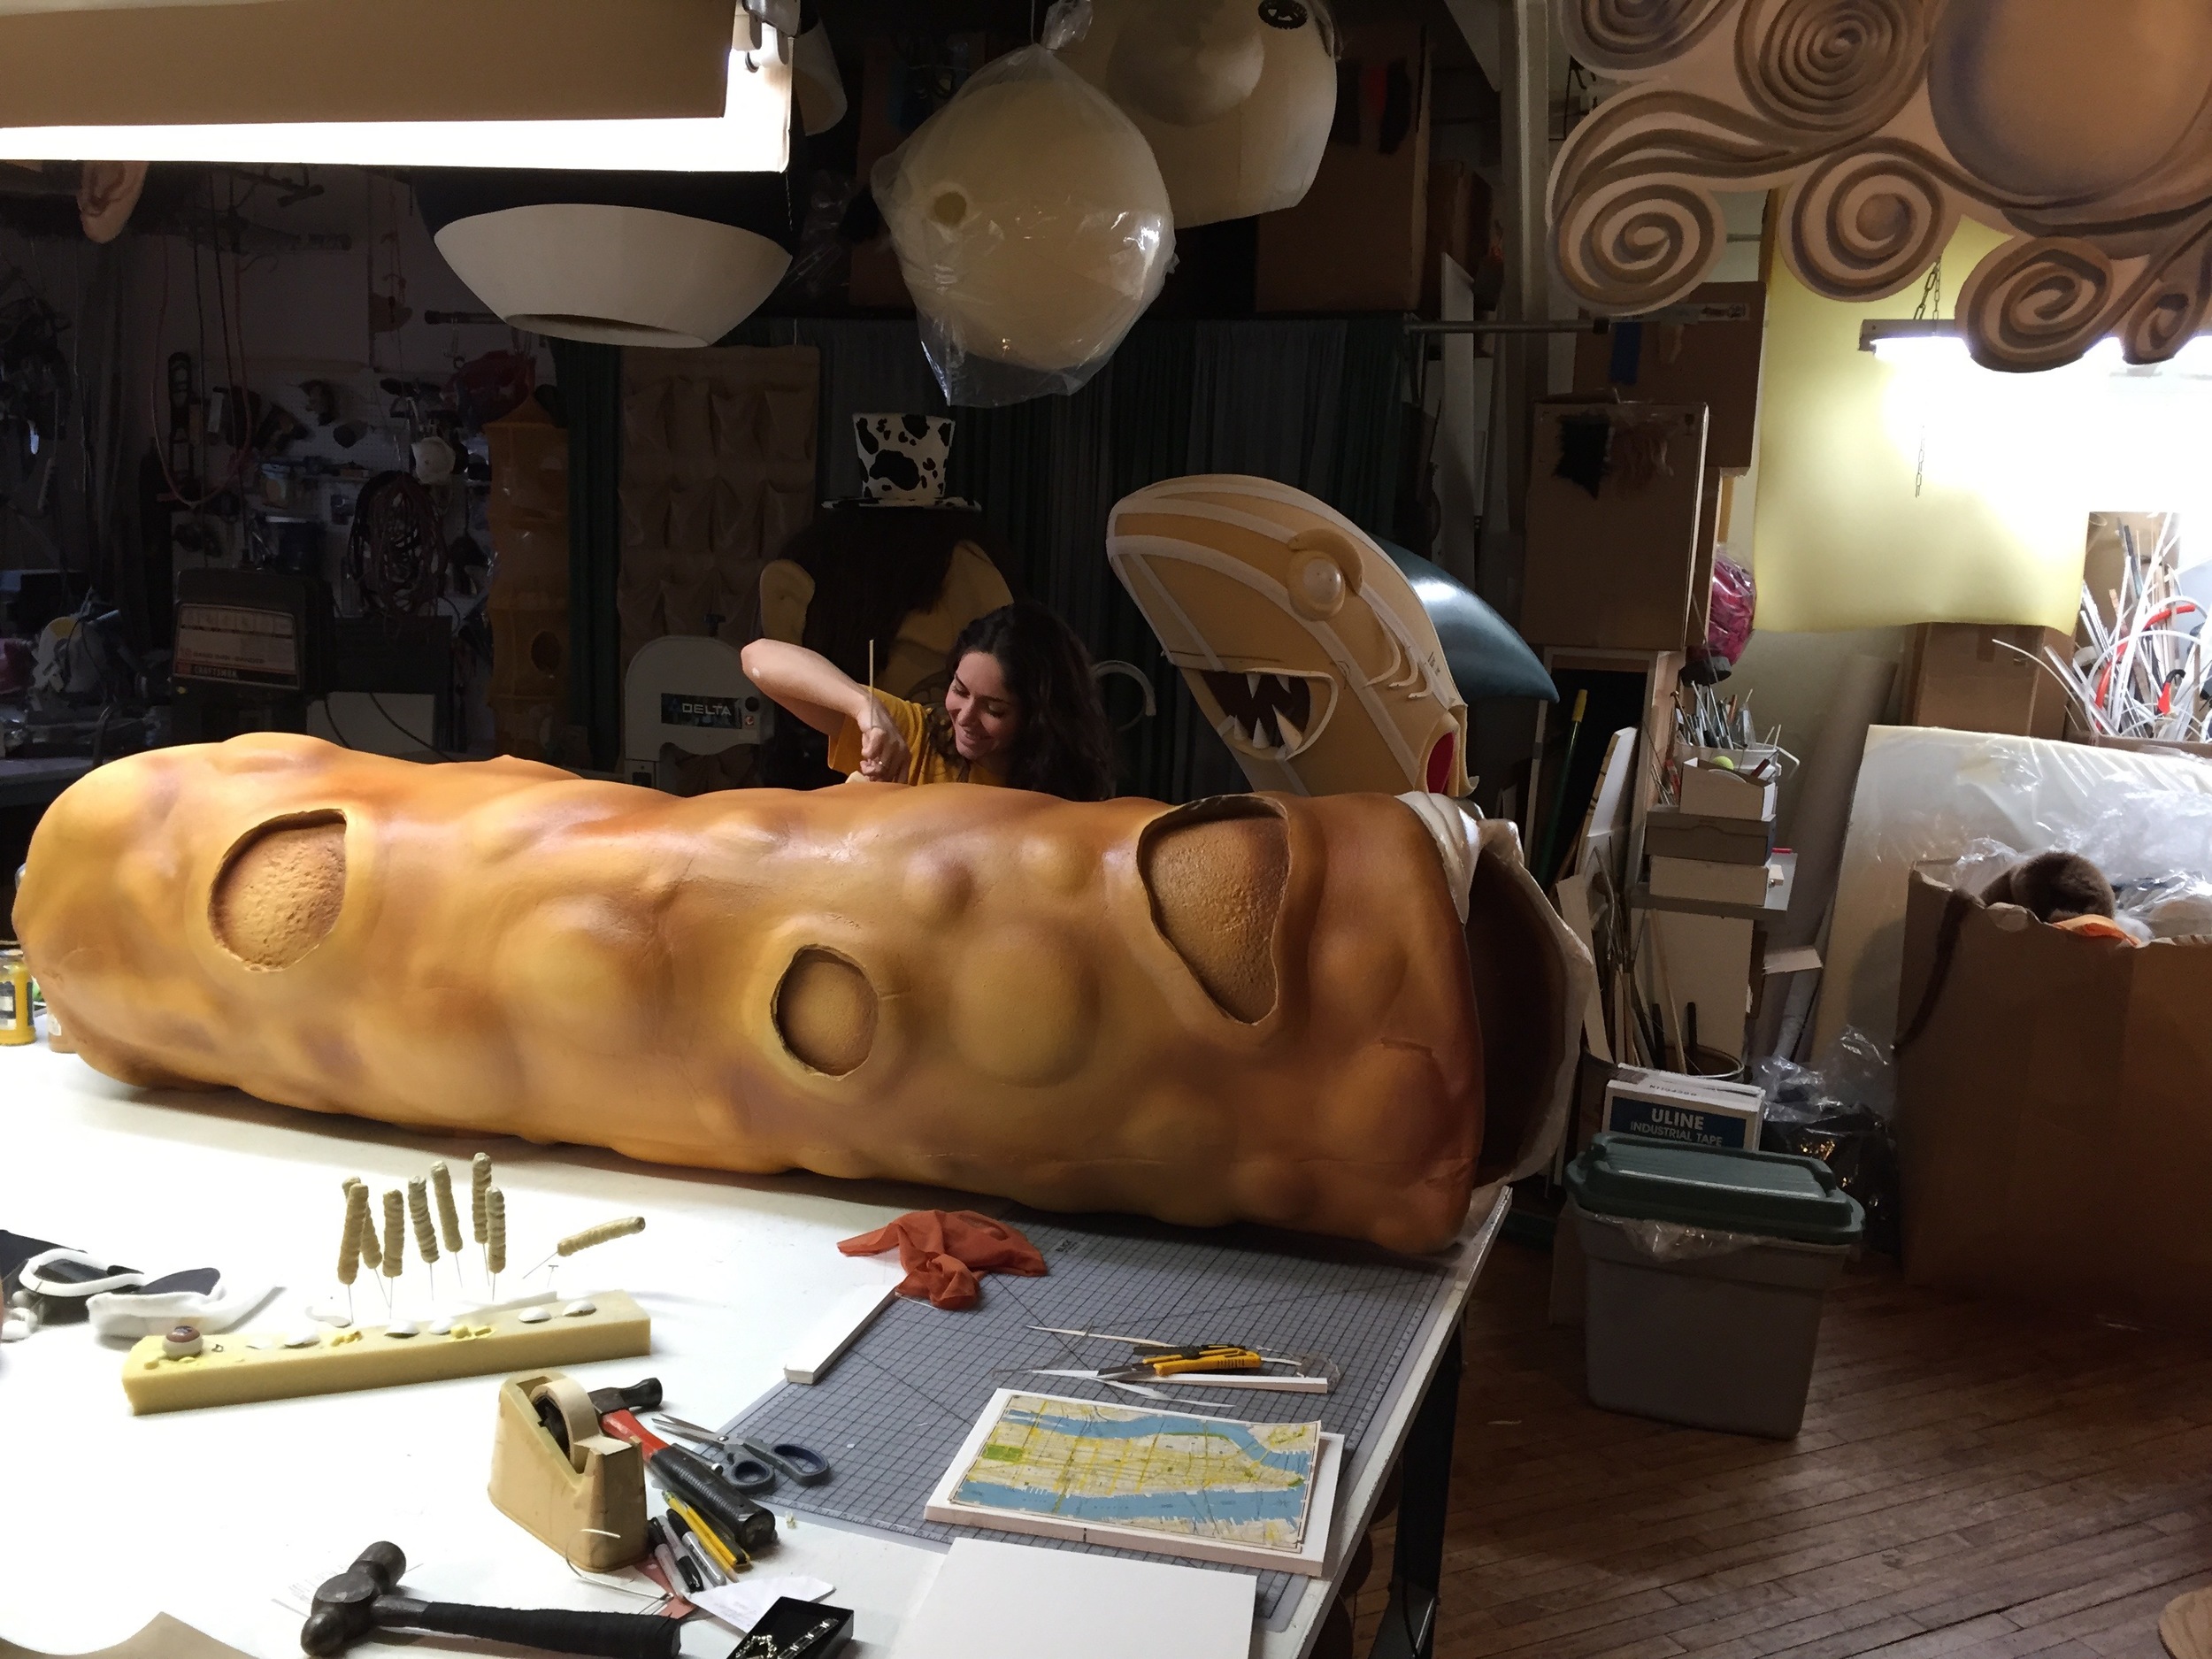 Final touches on the cannoli costume